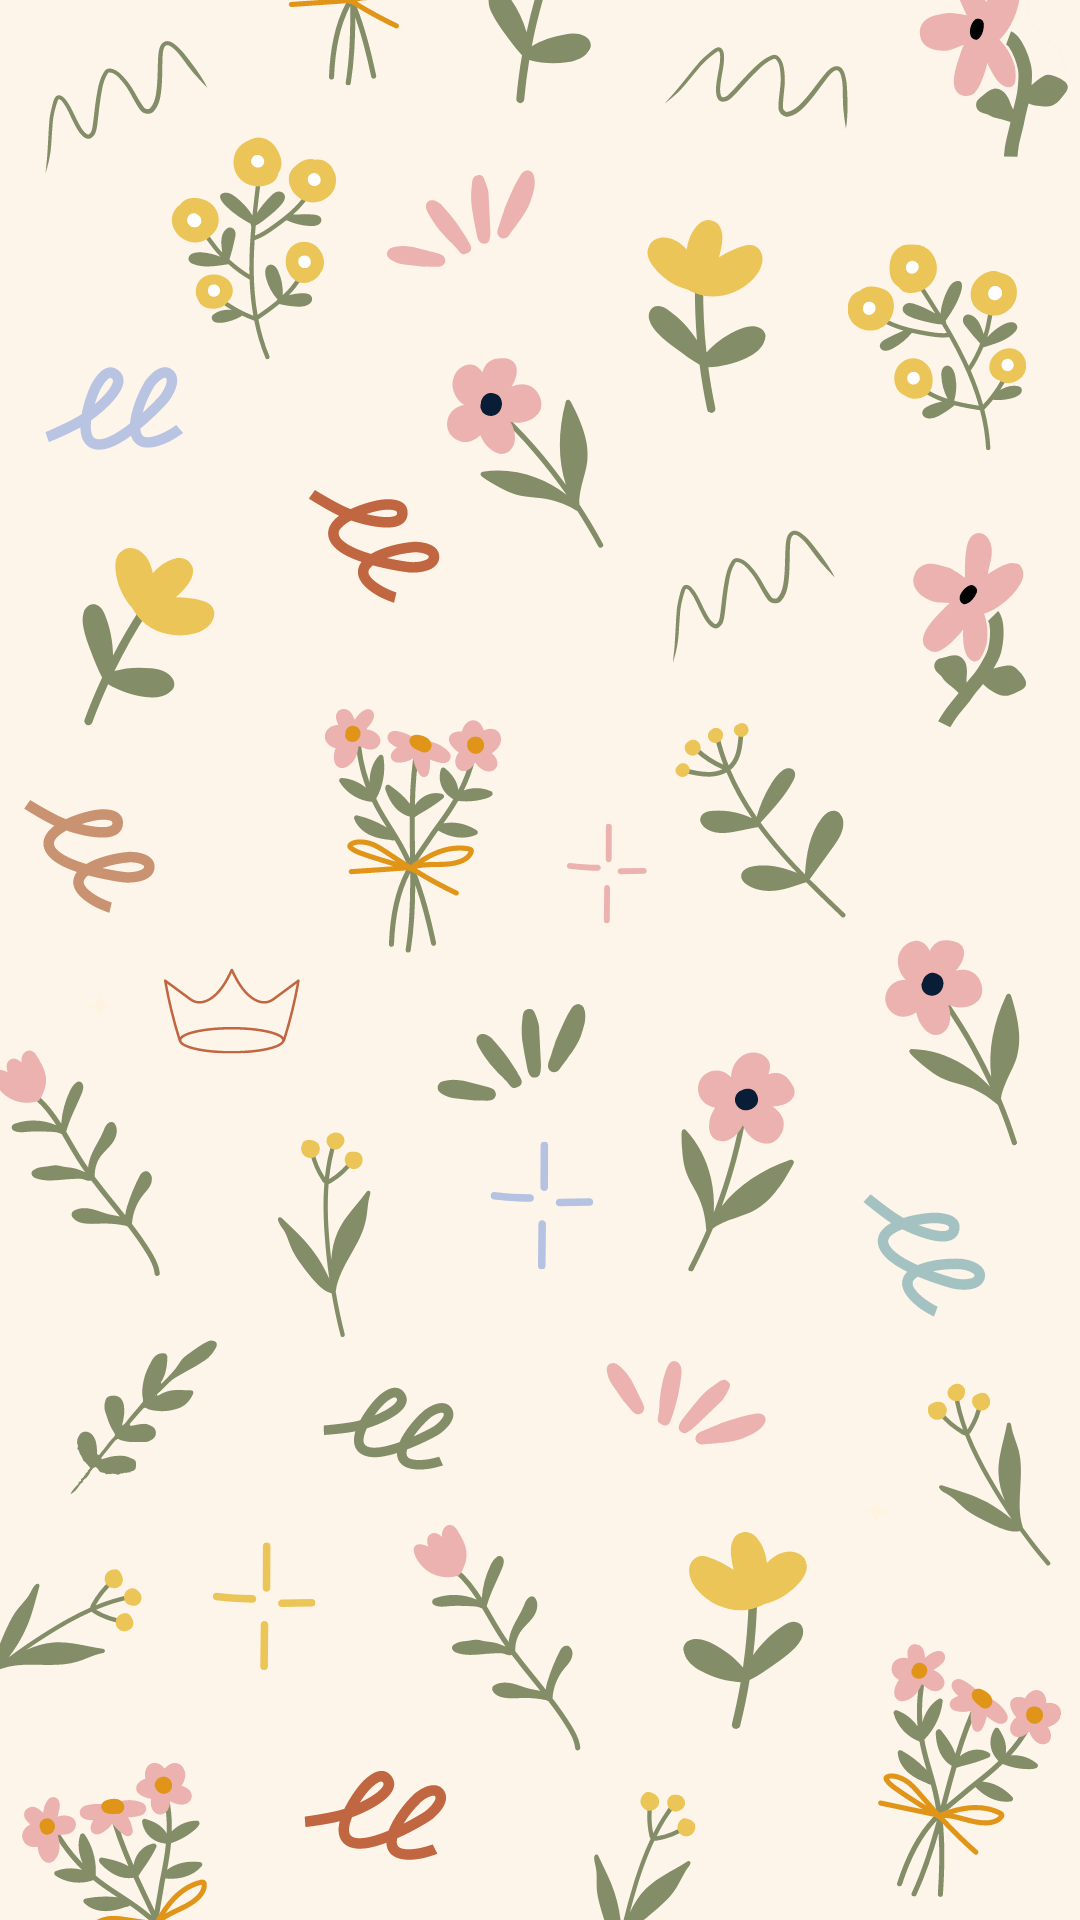 A phone wallpaper with small flowers and plants on a light yellow background - Spring